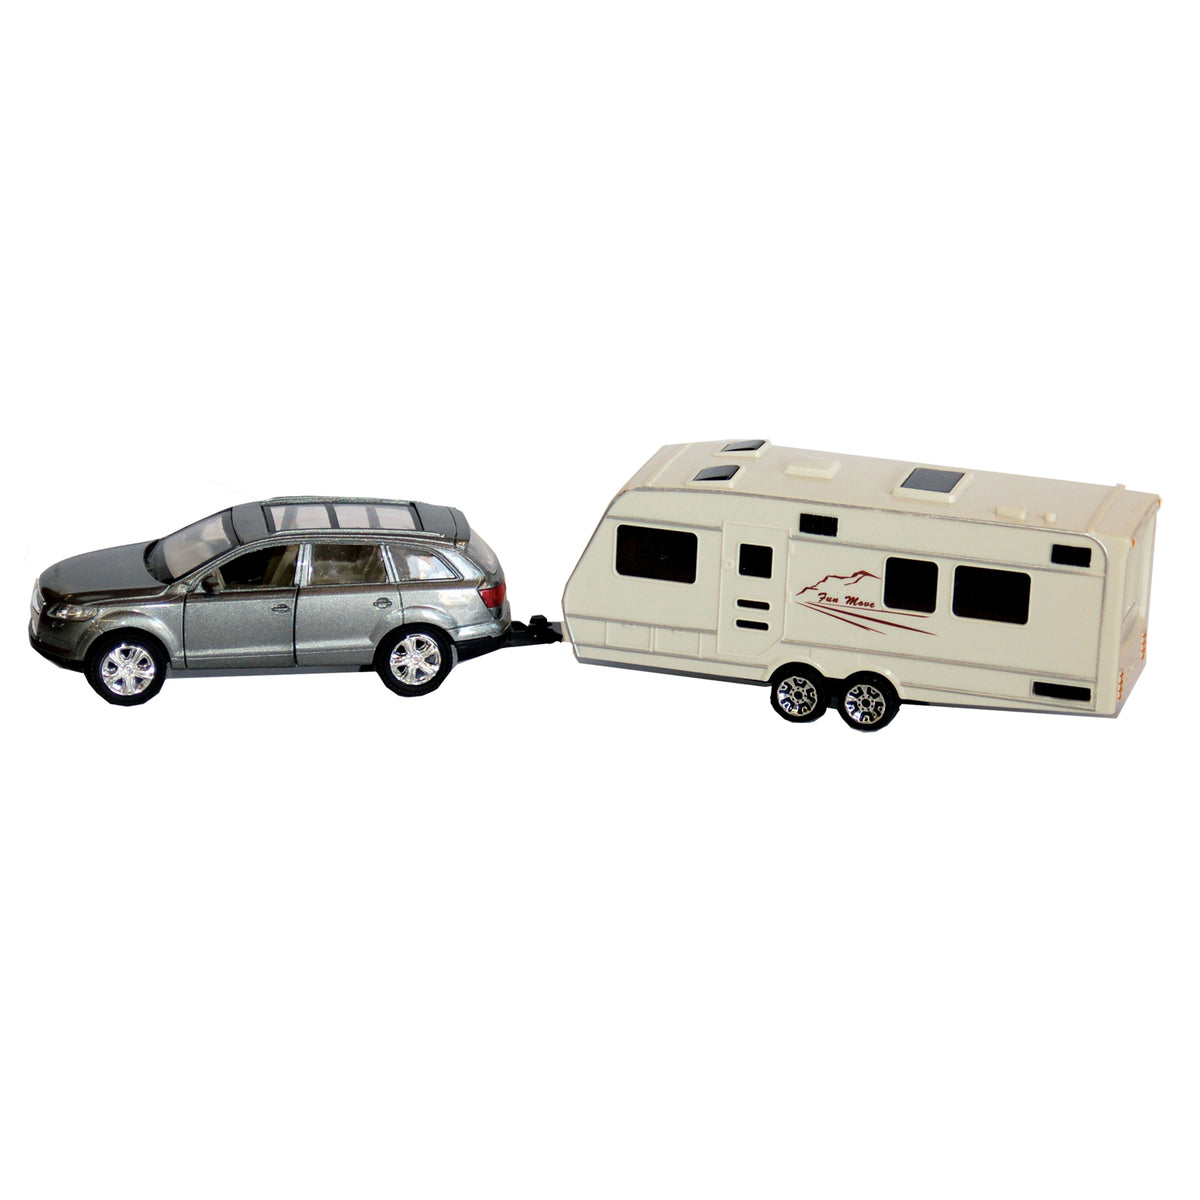 Prime Products 27-0026 SUV and Trailer Toy